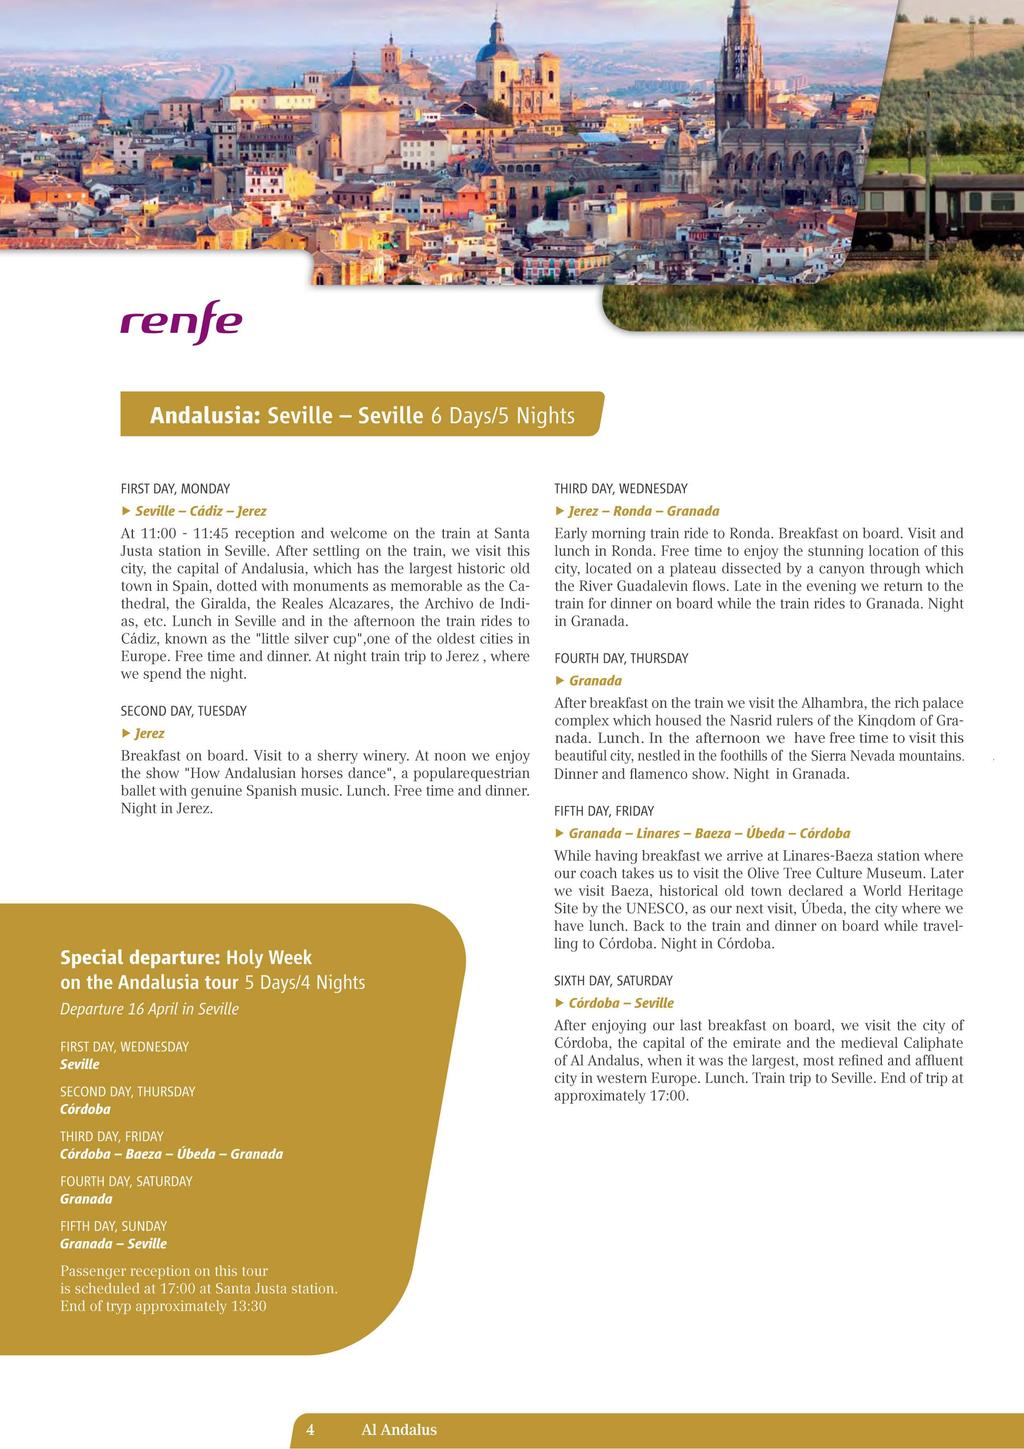 renfe Andalusia: Seville - Seville 6 Days/5 Nights FIRST DAY, MONDAY ~ Seville - Cádiz - Jerez At 11 :00-11:45 reception and welcome on the train at Santa Justa station in Seville.